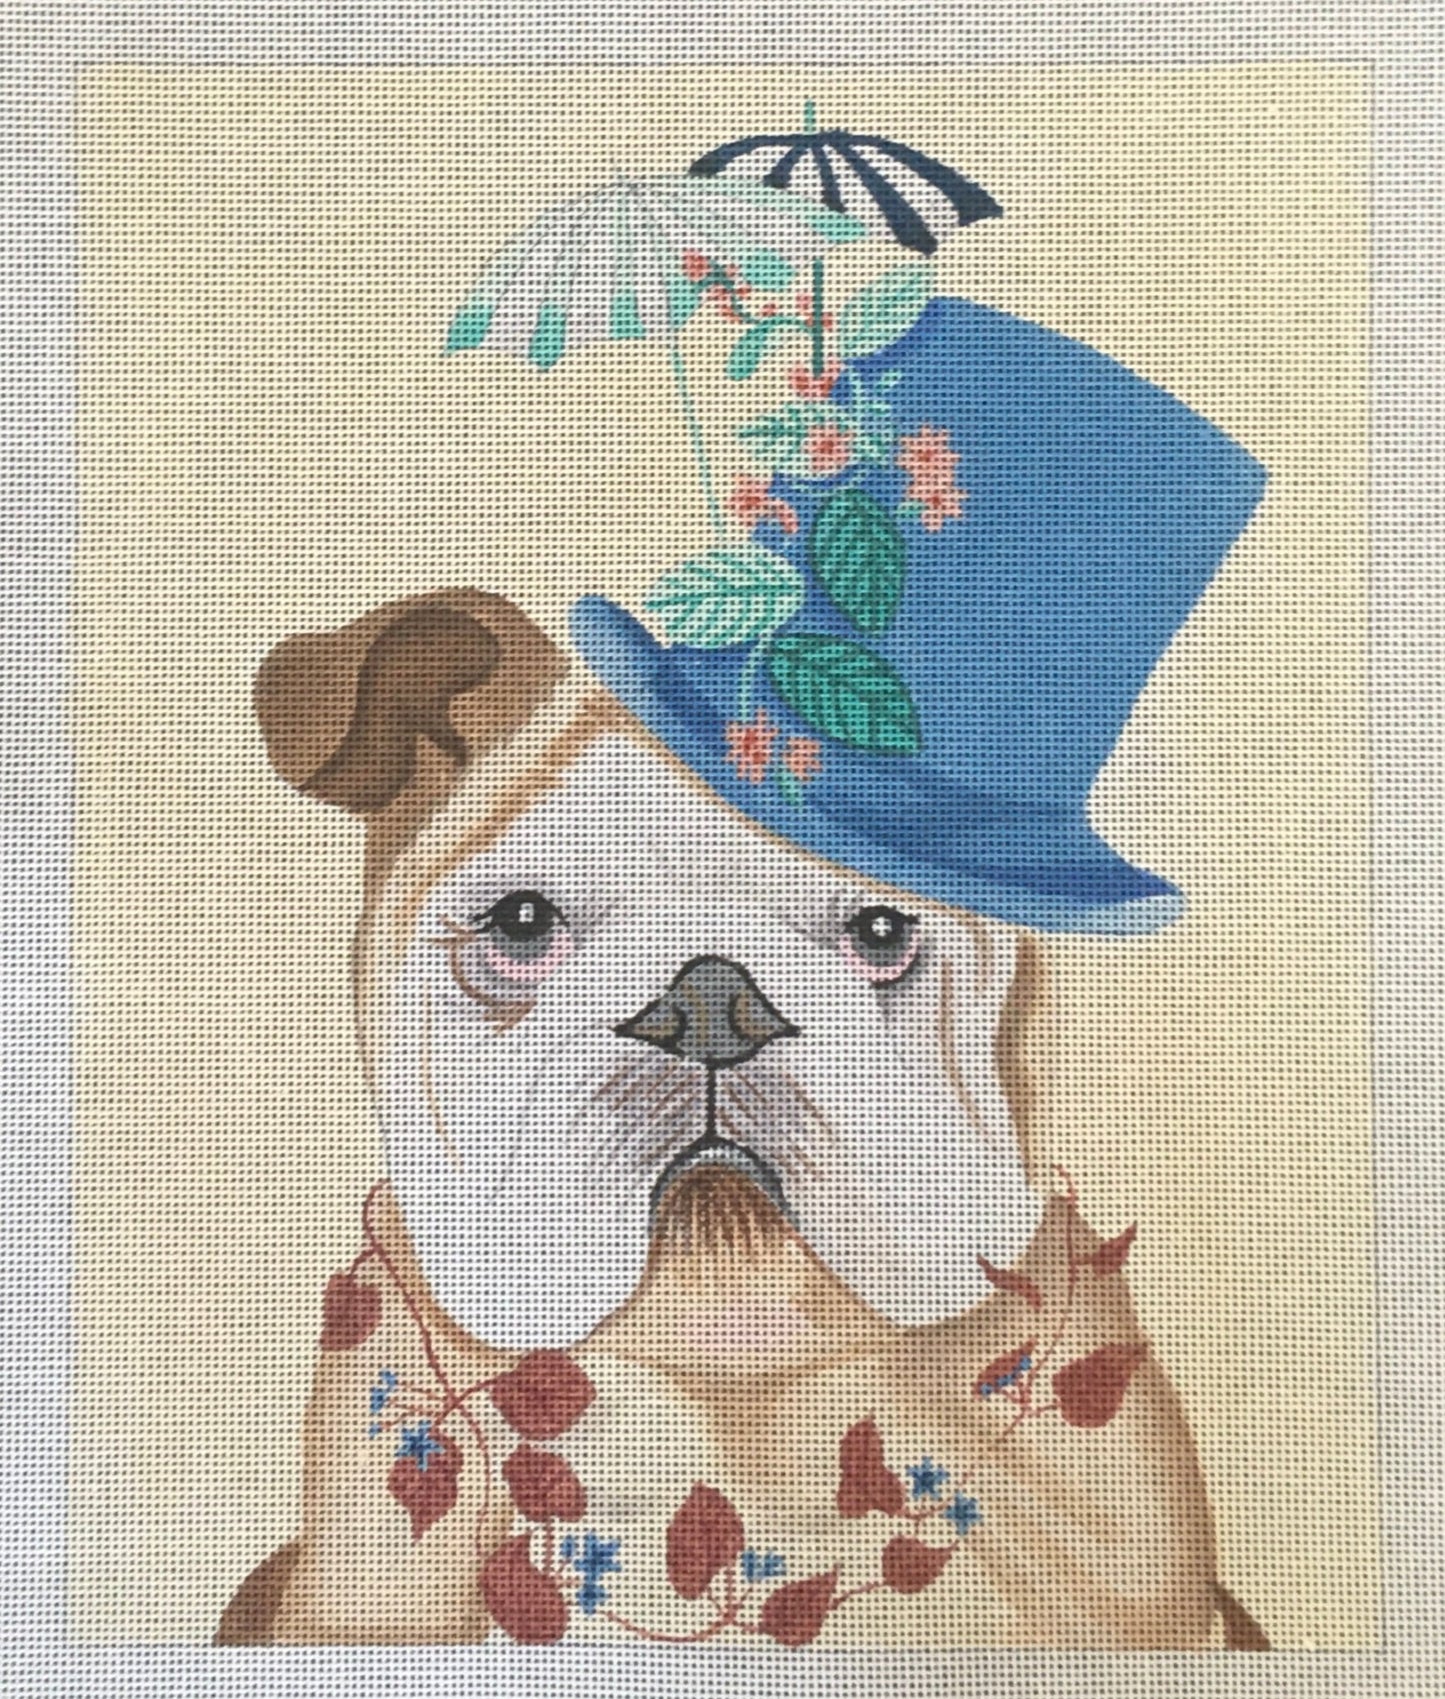 FF-01 Bulldog with Milliner's Hat